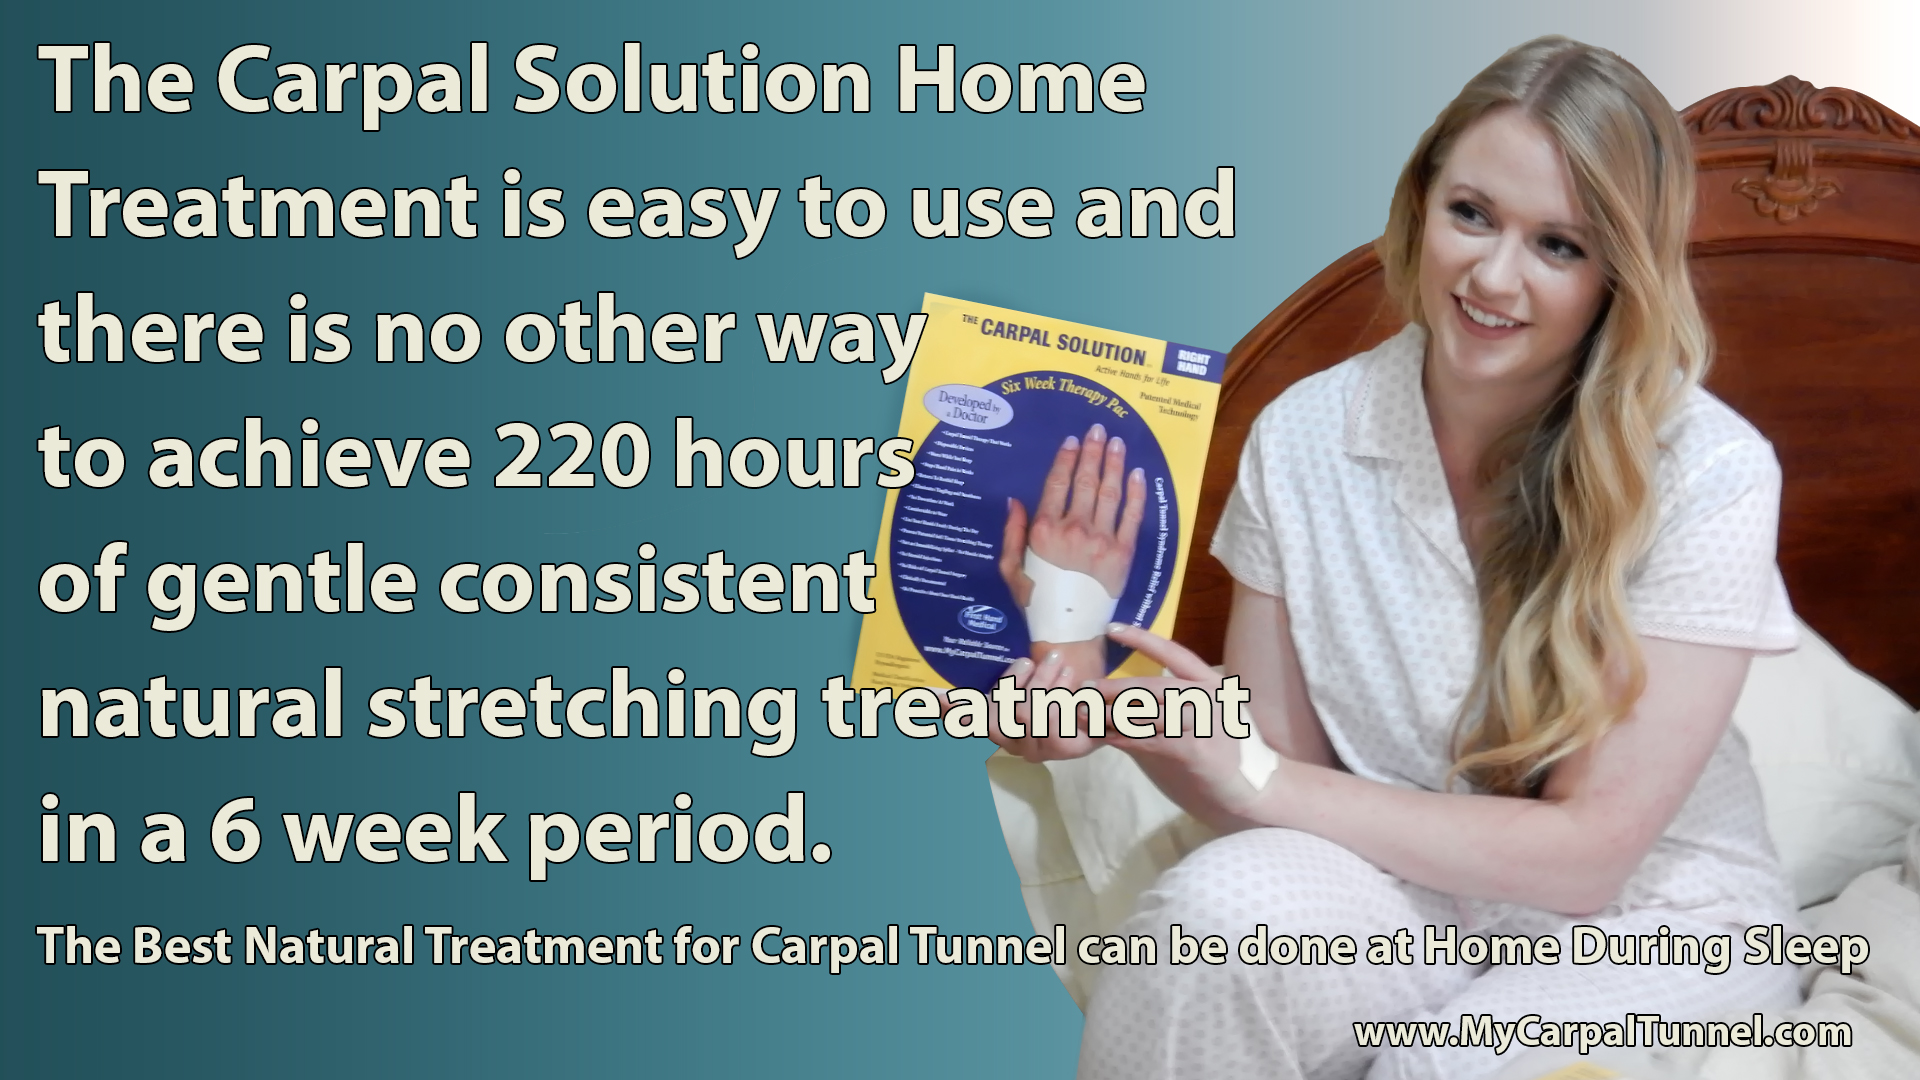 the carpal solution is voted the best natural treatment for carpal tunnel on facebook